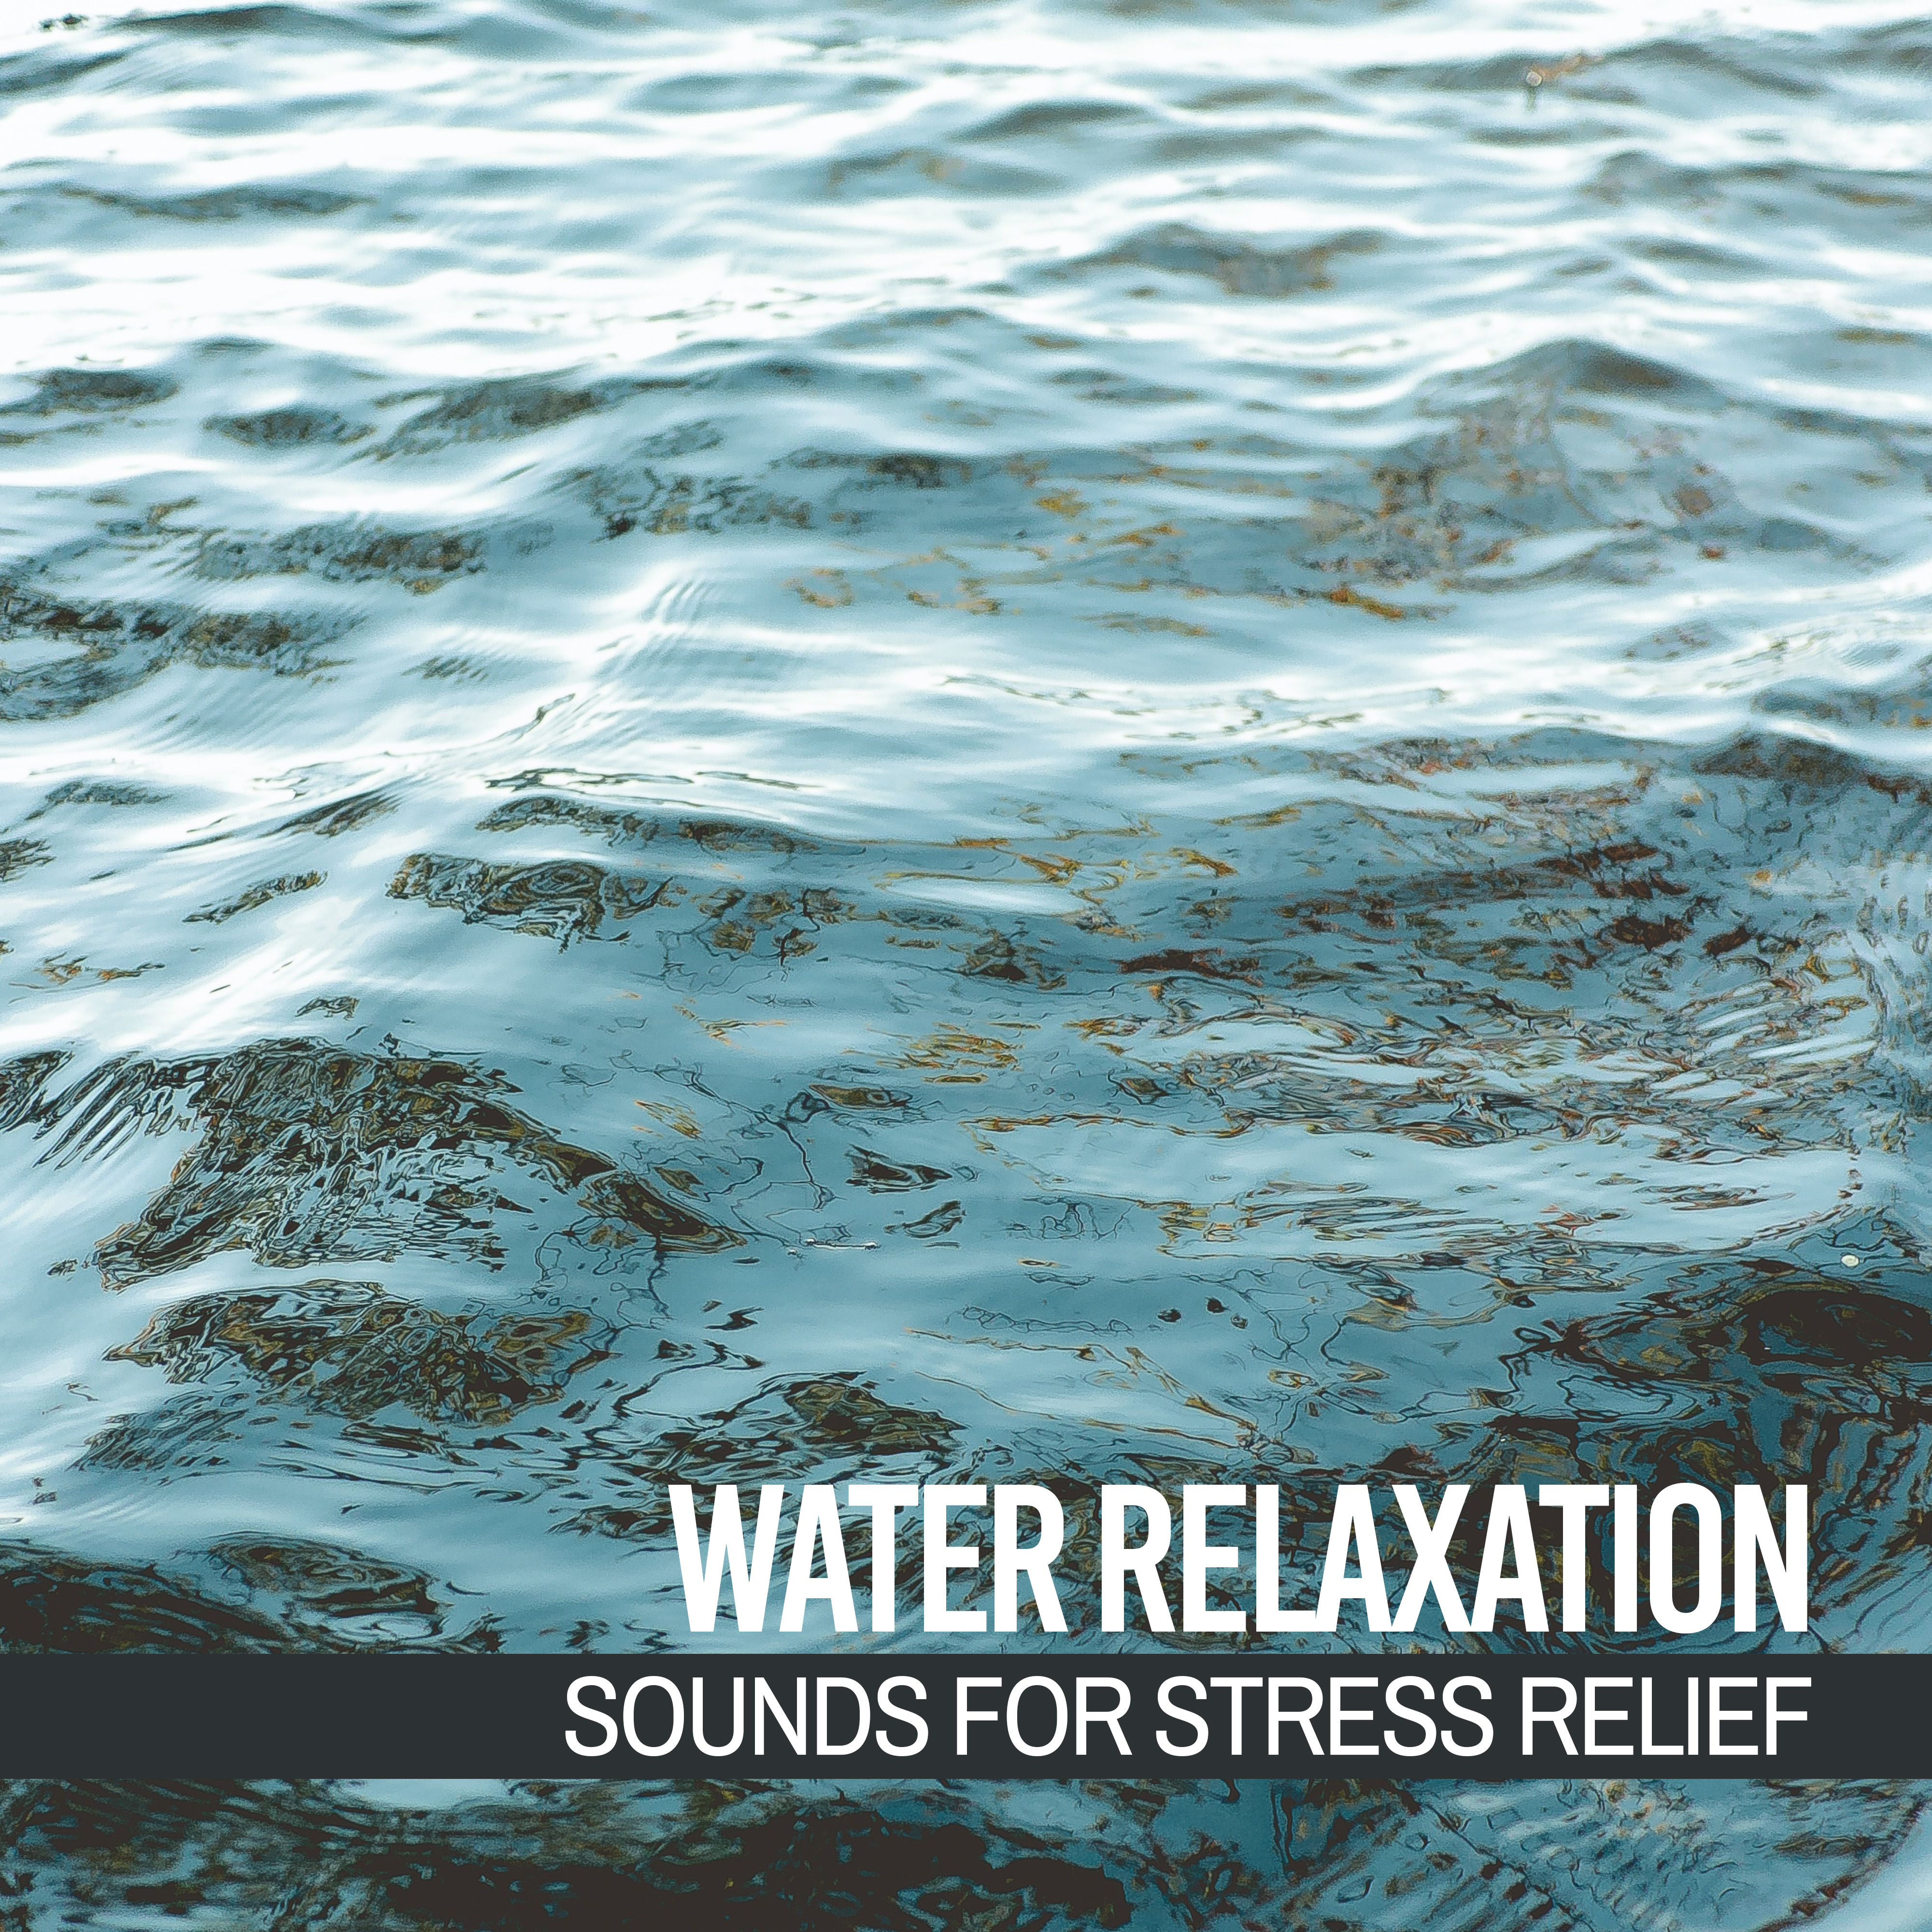 Water Relaxation Sounds for Stress Relief